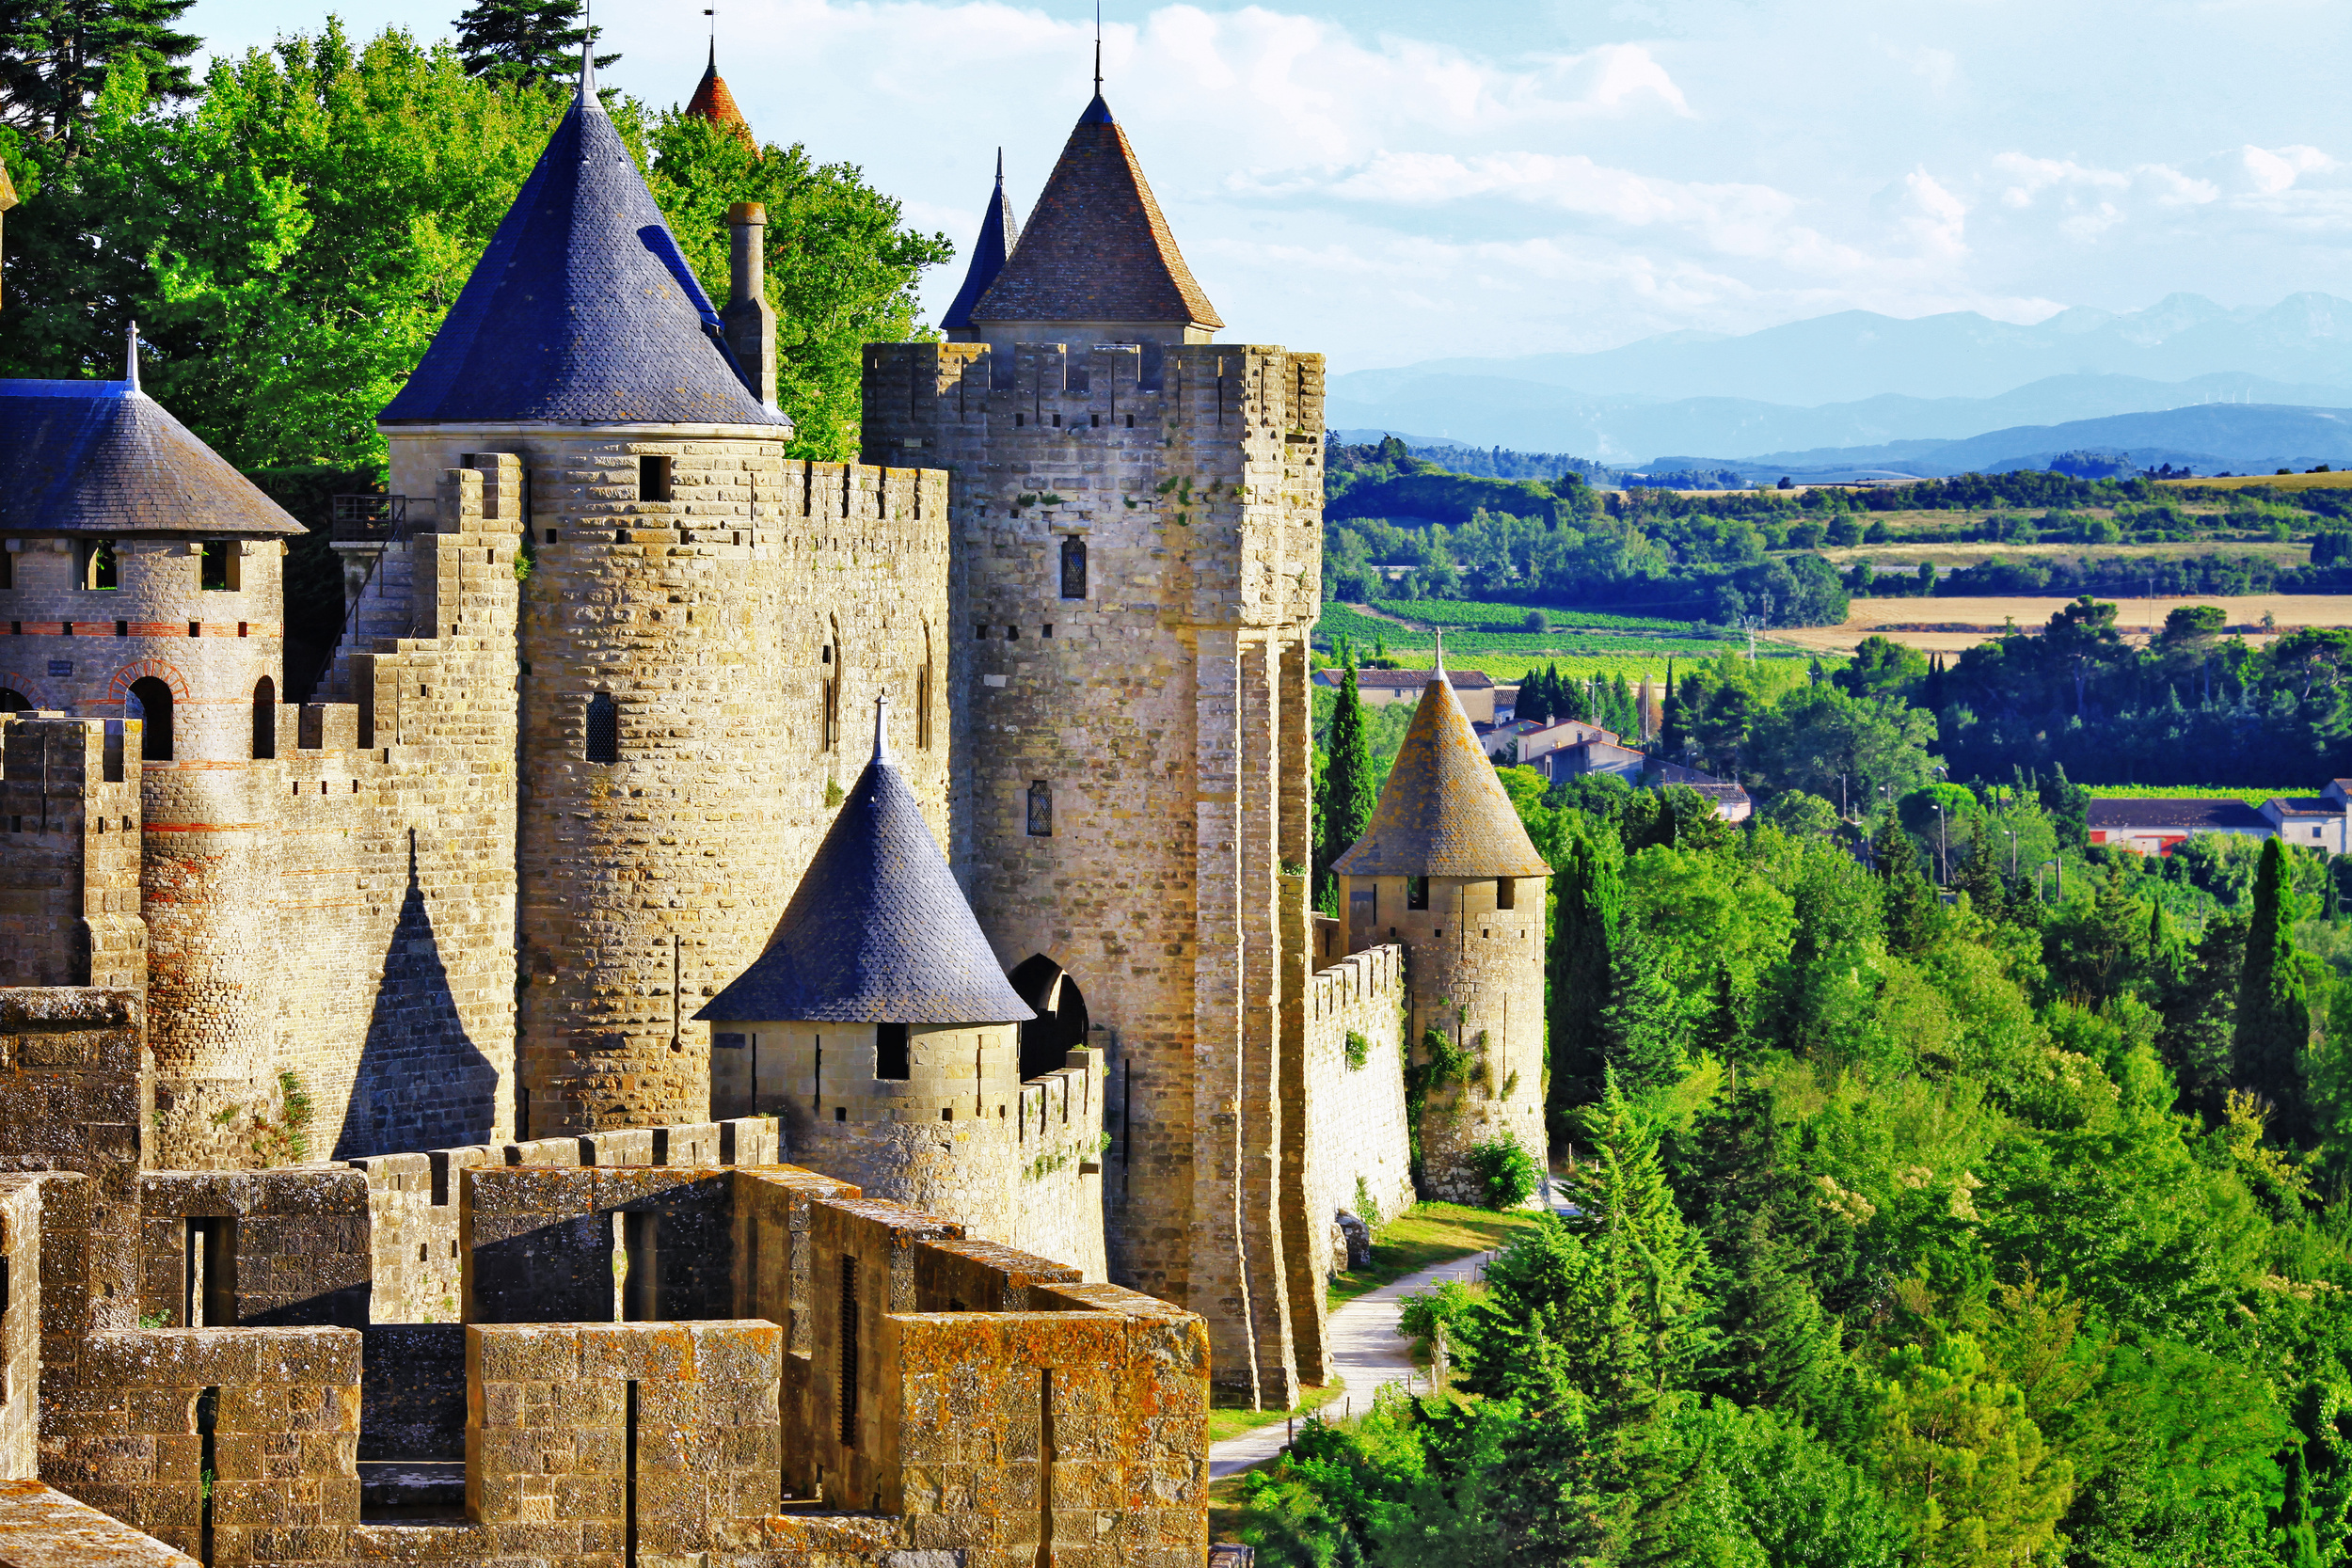 <p><span>Only 40 minutes by train from Toulouse, Carcassonne is one of the best-preserved medieval citadels. Perched on a hill overlooking the surrounding countryside, it offers some of the best views in Provence.</span></p><p>You may also like: <a href='https://www.yardbarker.com/lifestyle/articles/25_classic_ice_cream_truck_treats_you_probably_forgot_about_031924/s1__23965132'>25 classic ice cream truck treats you probably forgot about</a></p>